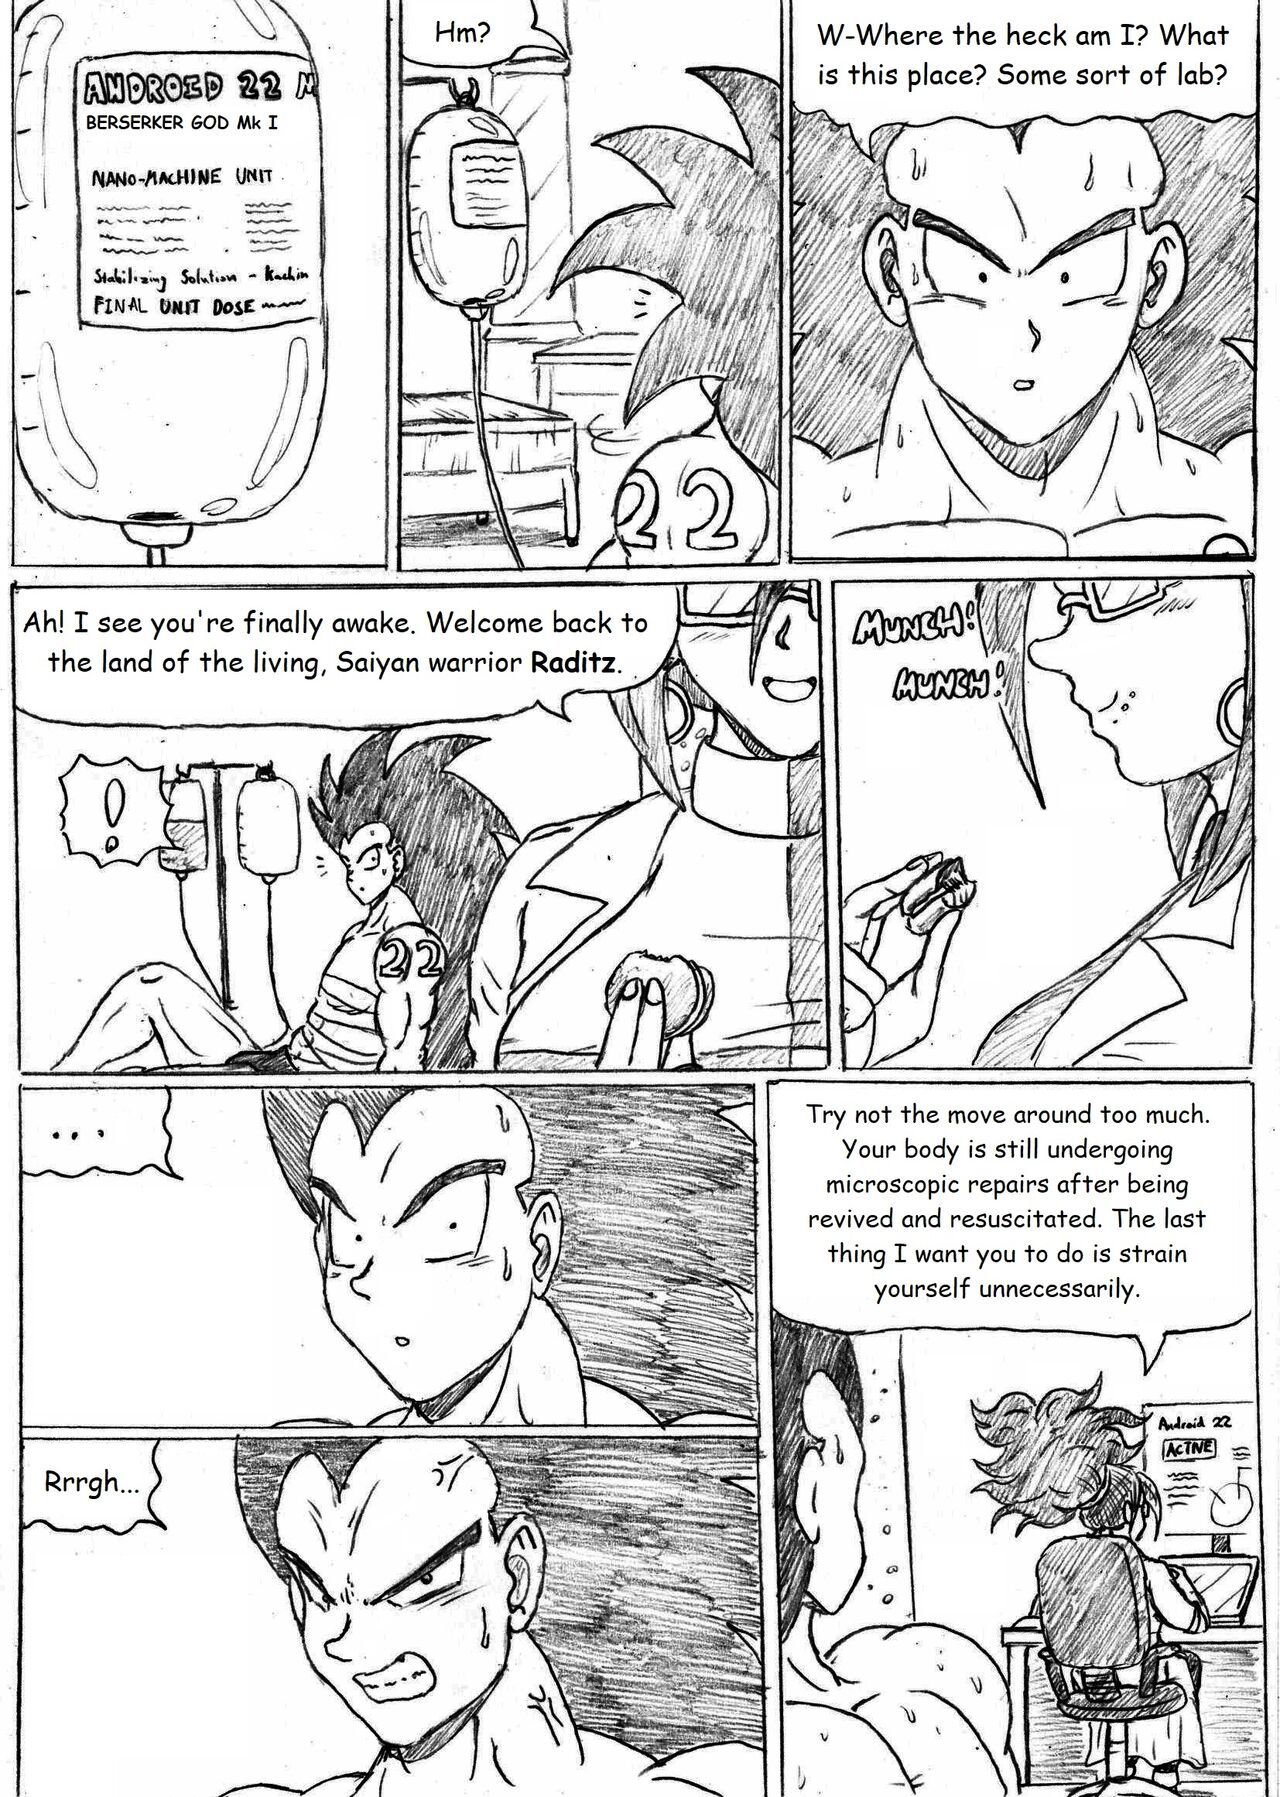 [TheWriteFiction] Dragonball Z Golden Age - Chapter 5 - Teamwork (Ongoing) 15